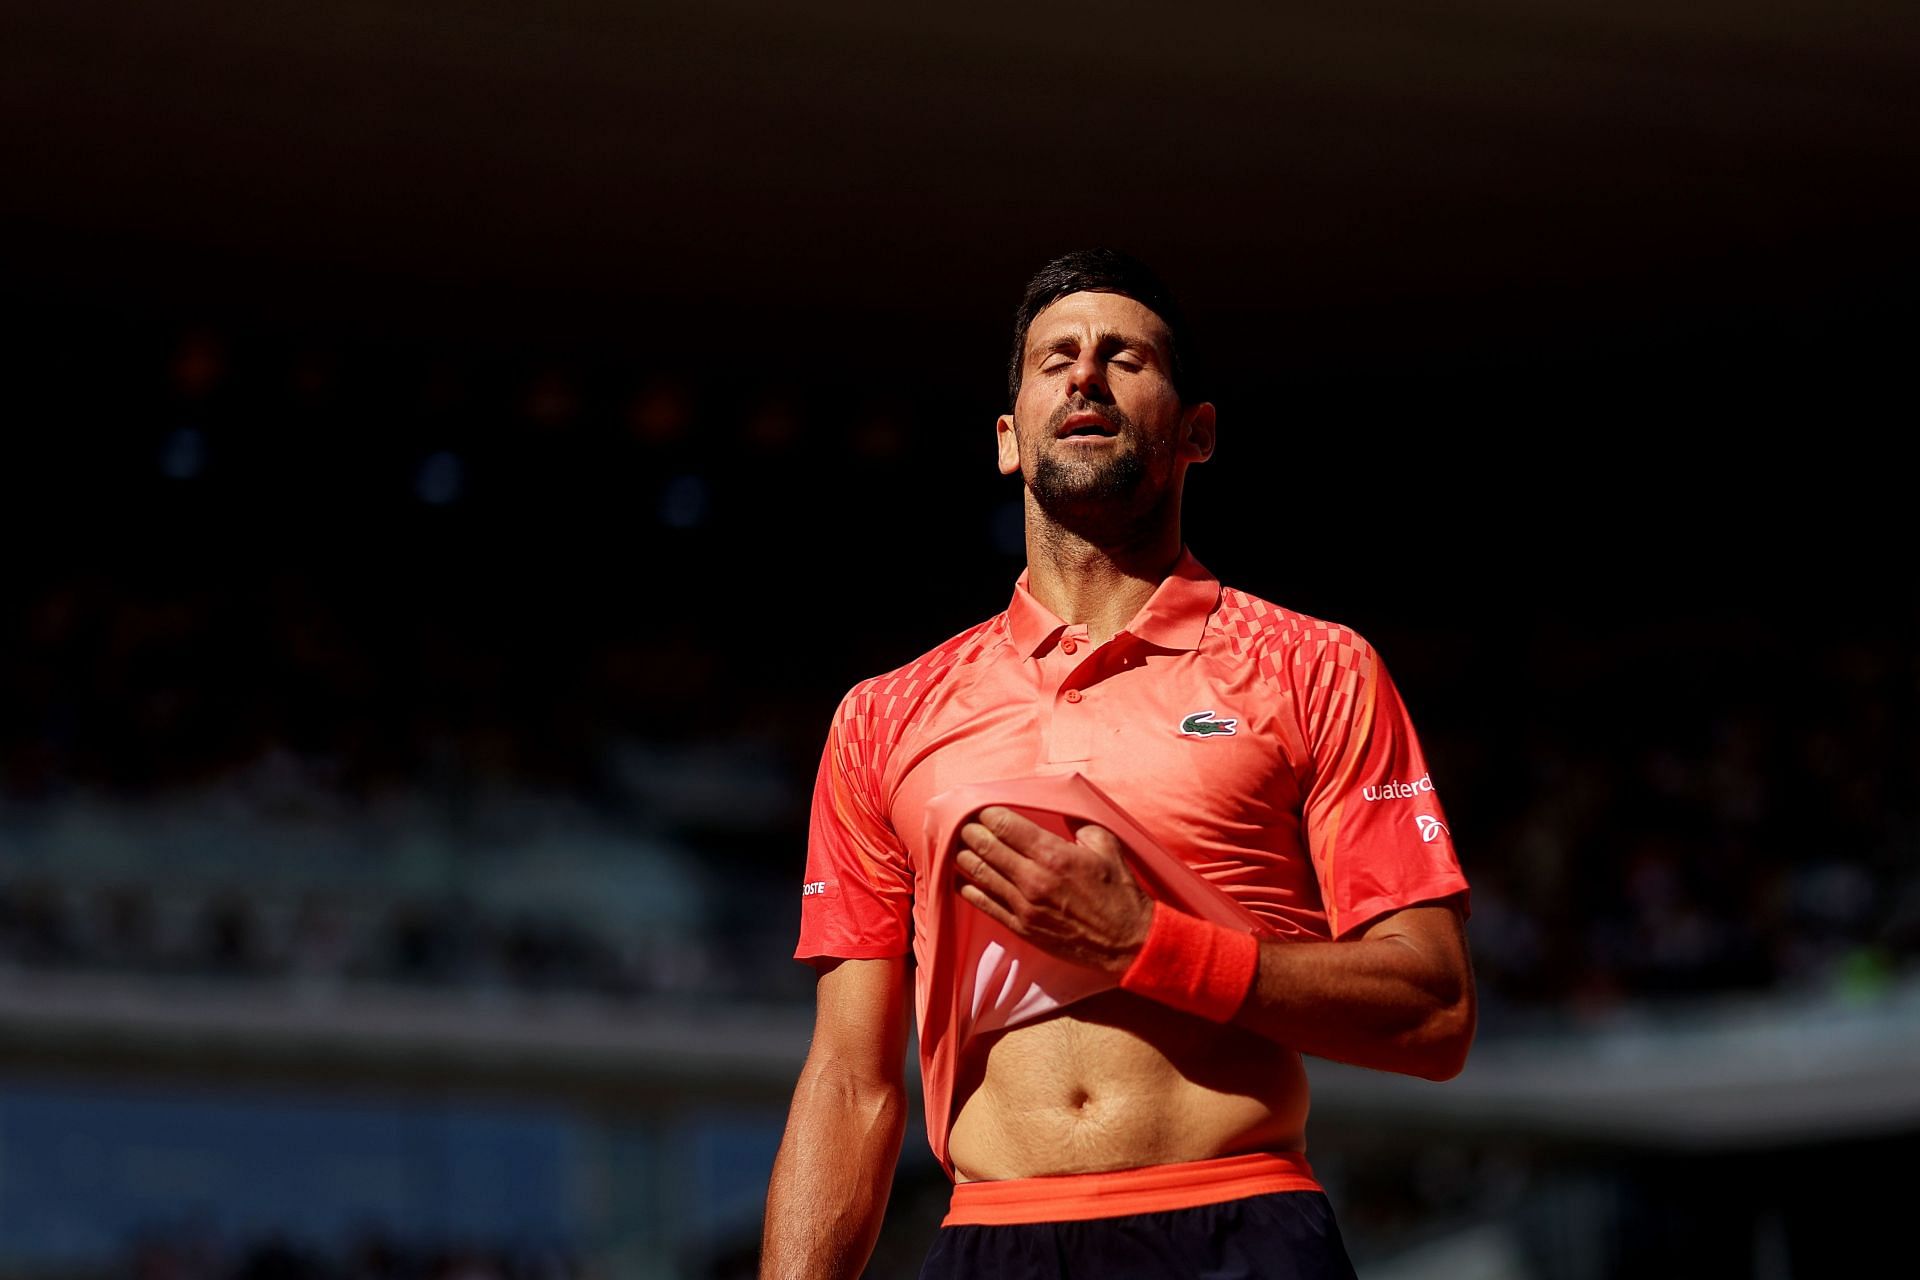 Novak Djokovic took a medical timeout during the French Open 3R match